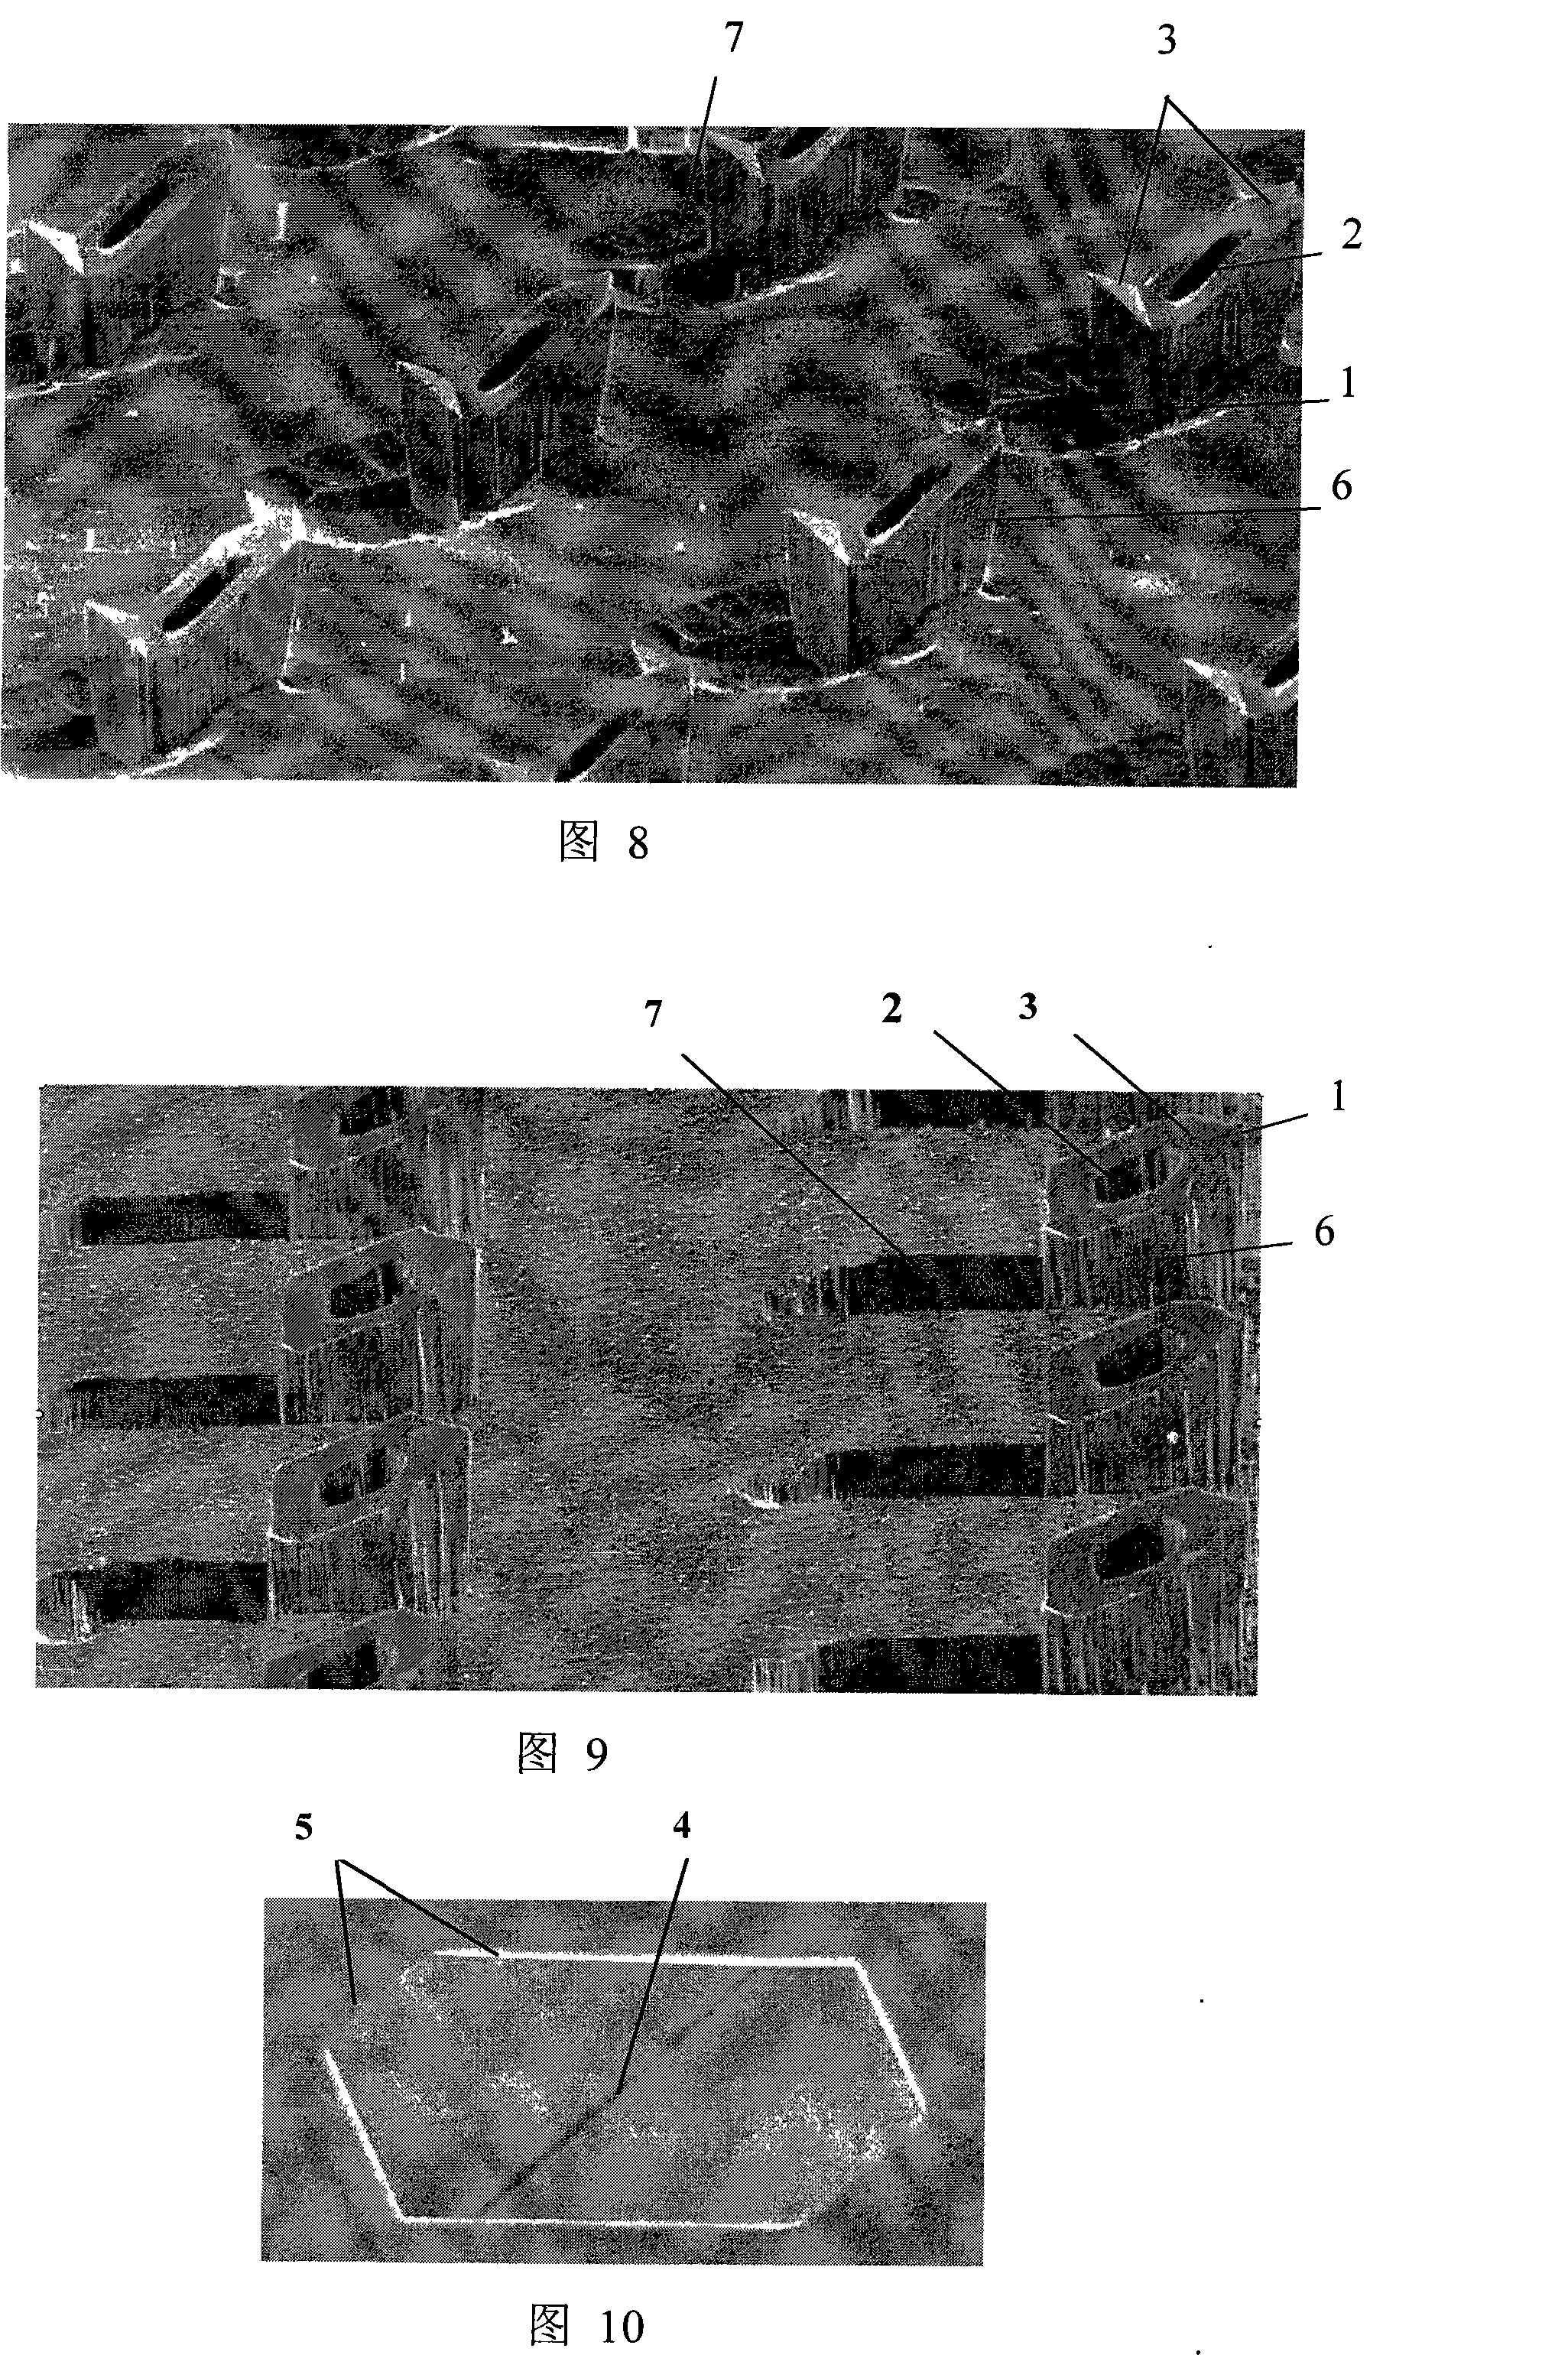 Miniature solid or hollow silicon needle, silicon needle array and preparing method thereof